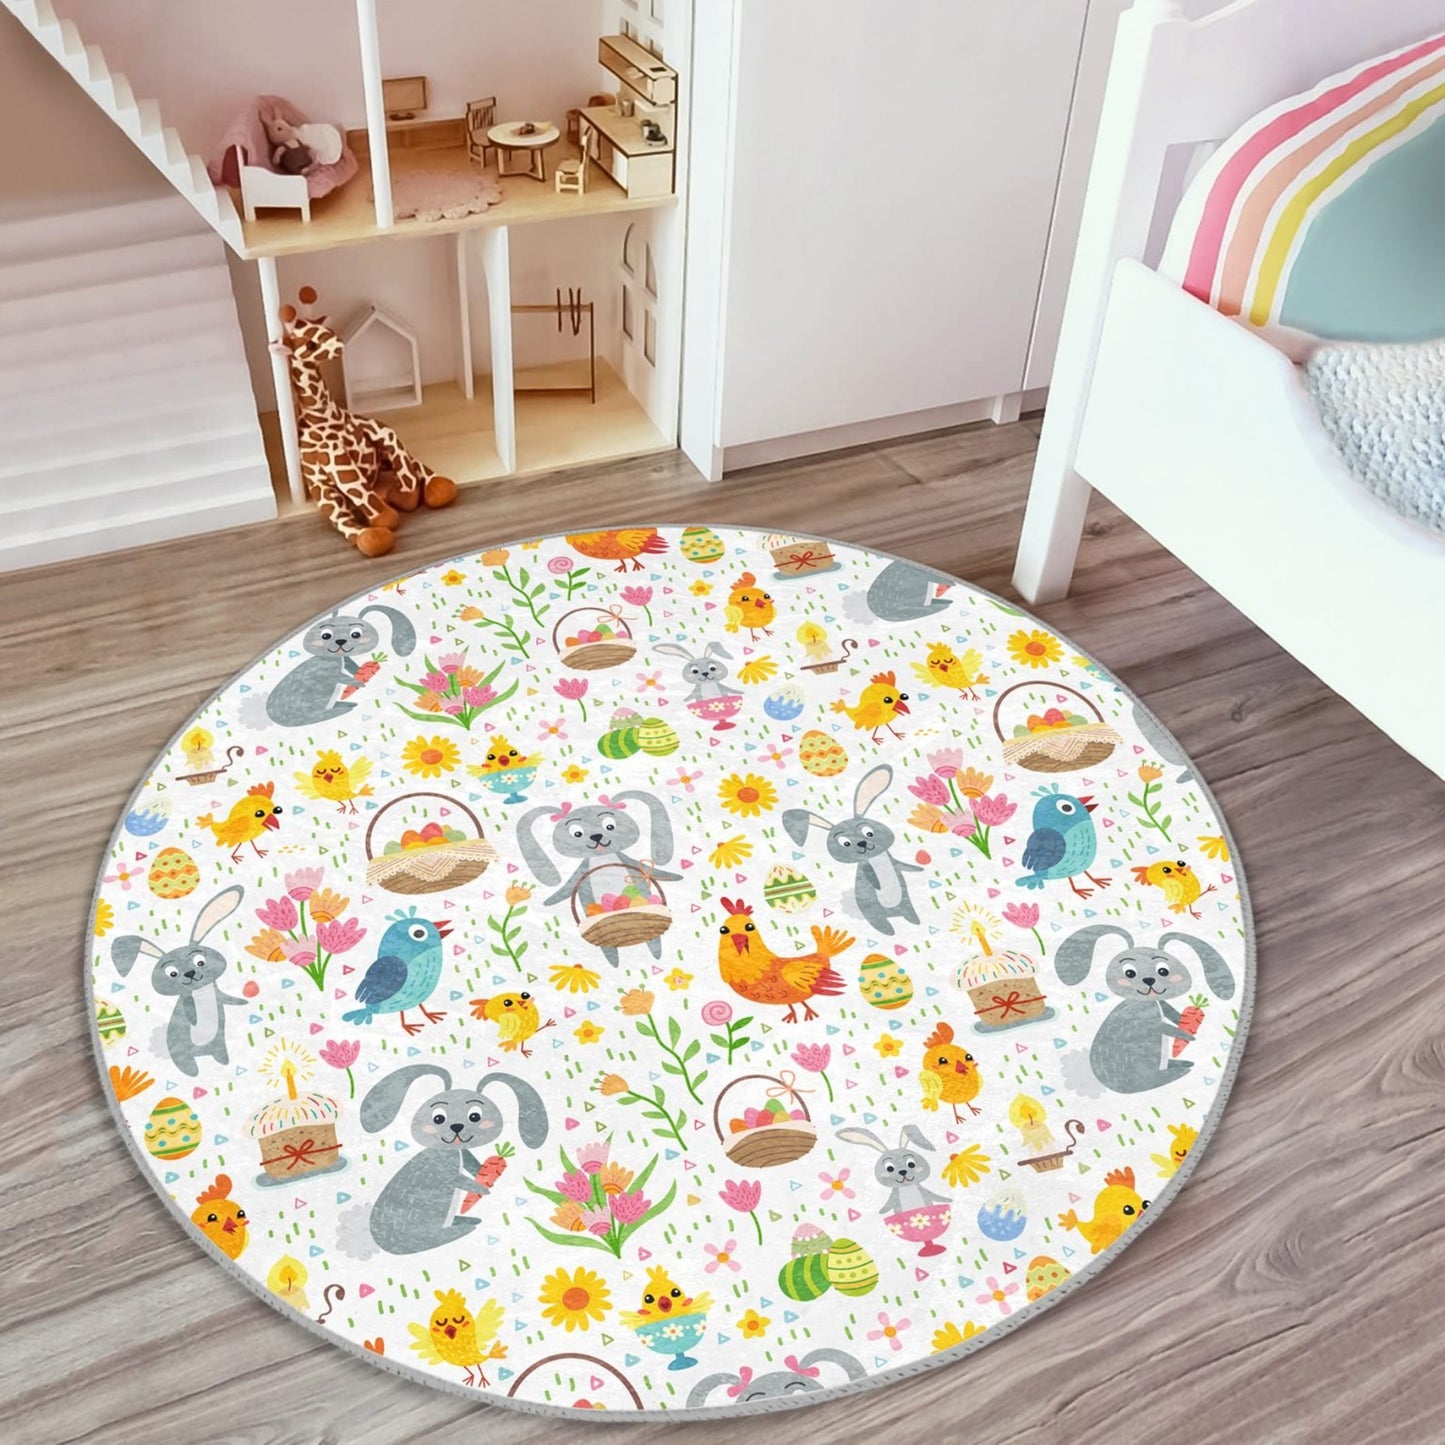 Rug with Farm Theme for Kids' Play Area